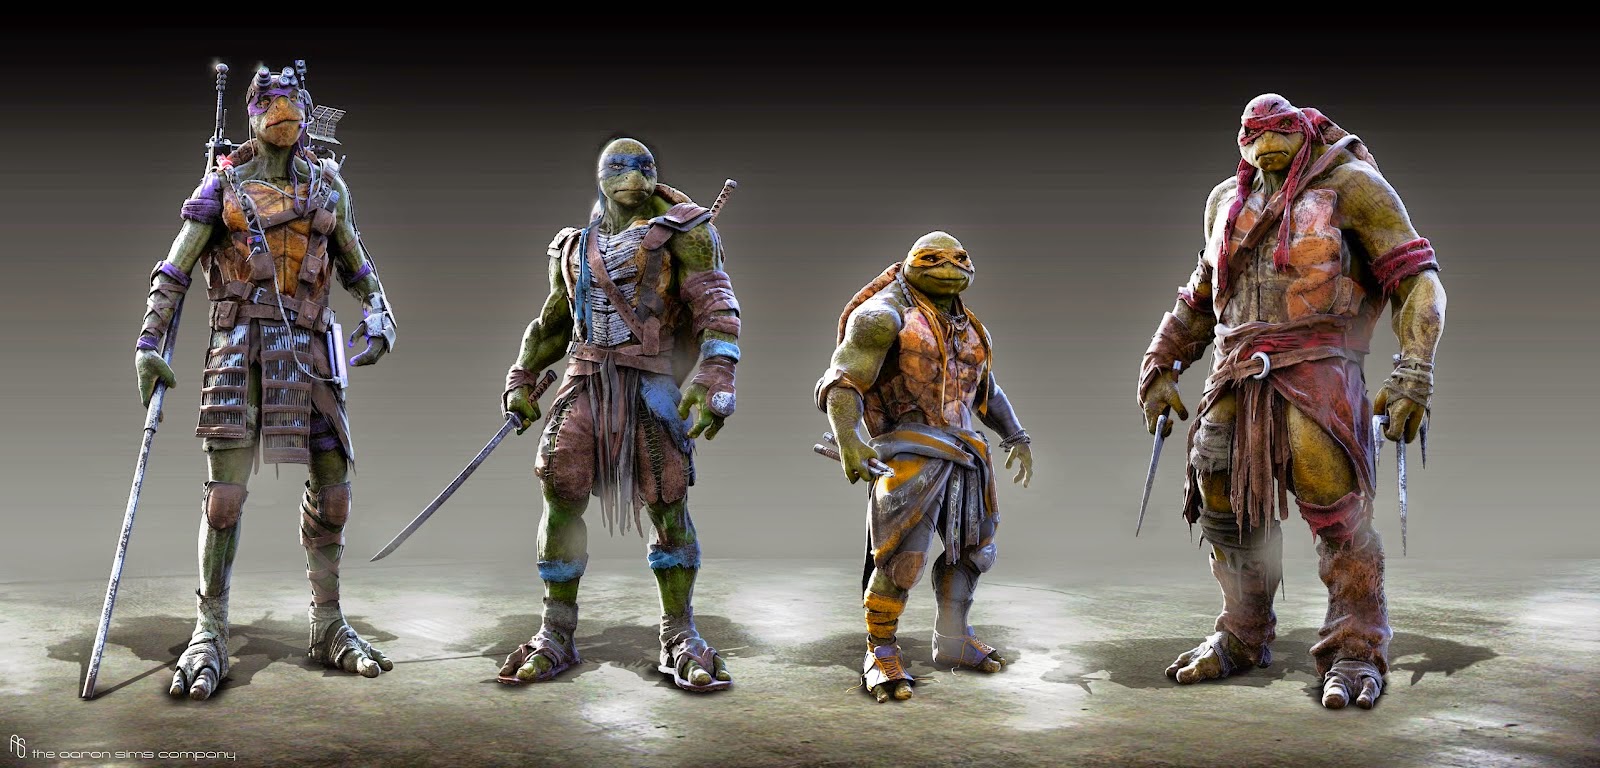 Teenage Mutant Ninja Turtles Backgrounds posted by Christopher Cunningham